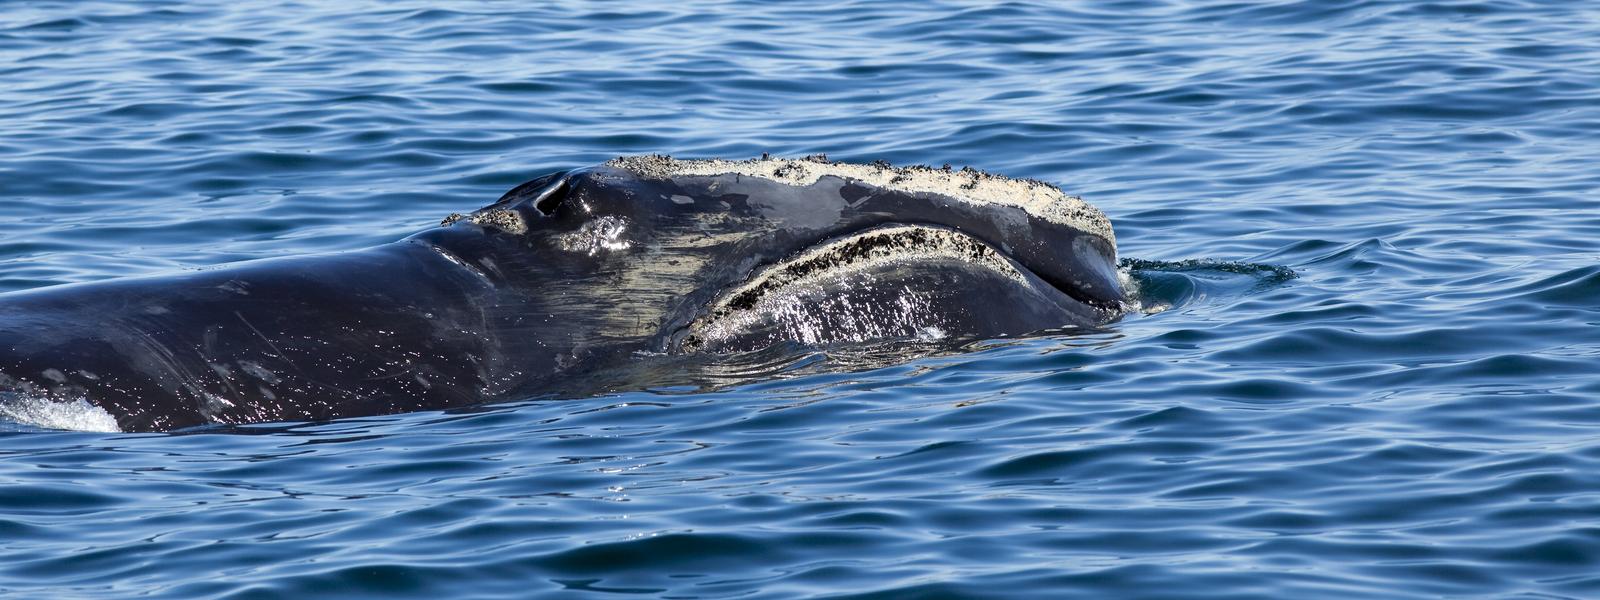 What do Right whales eat?